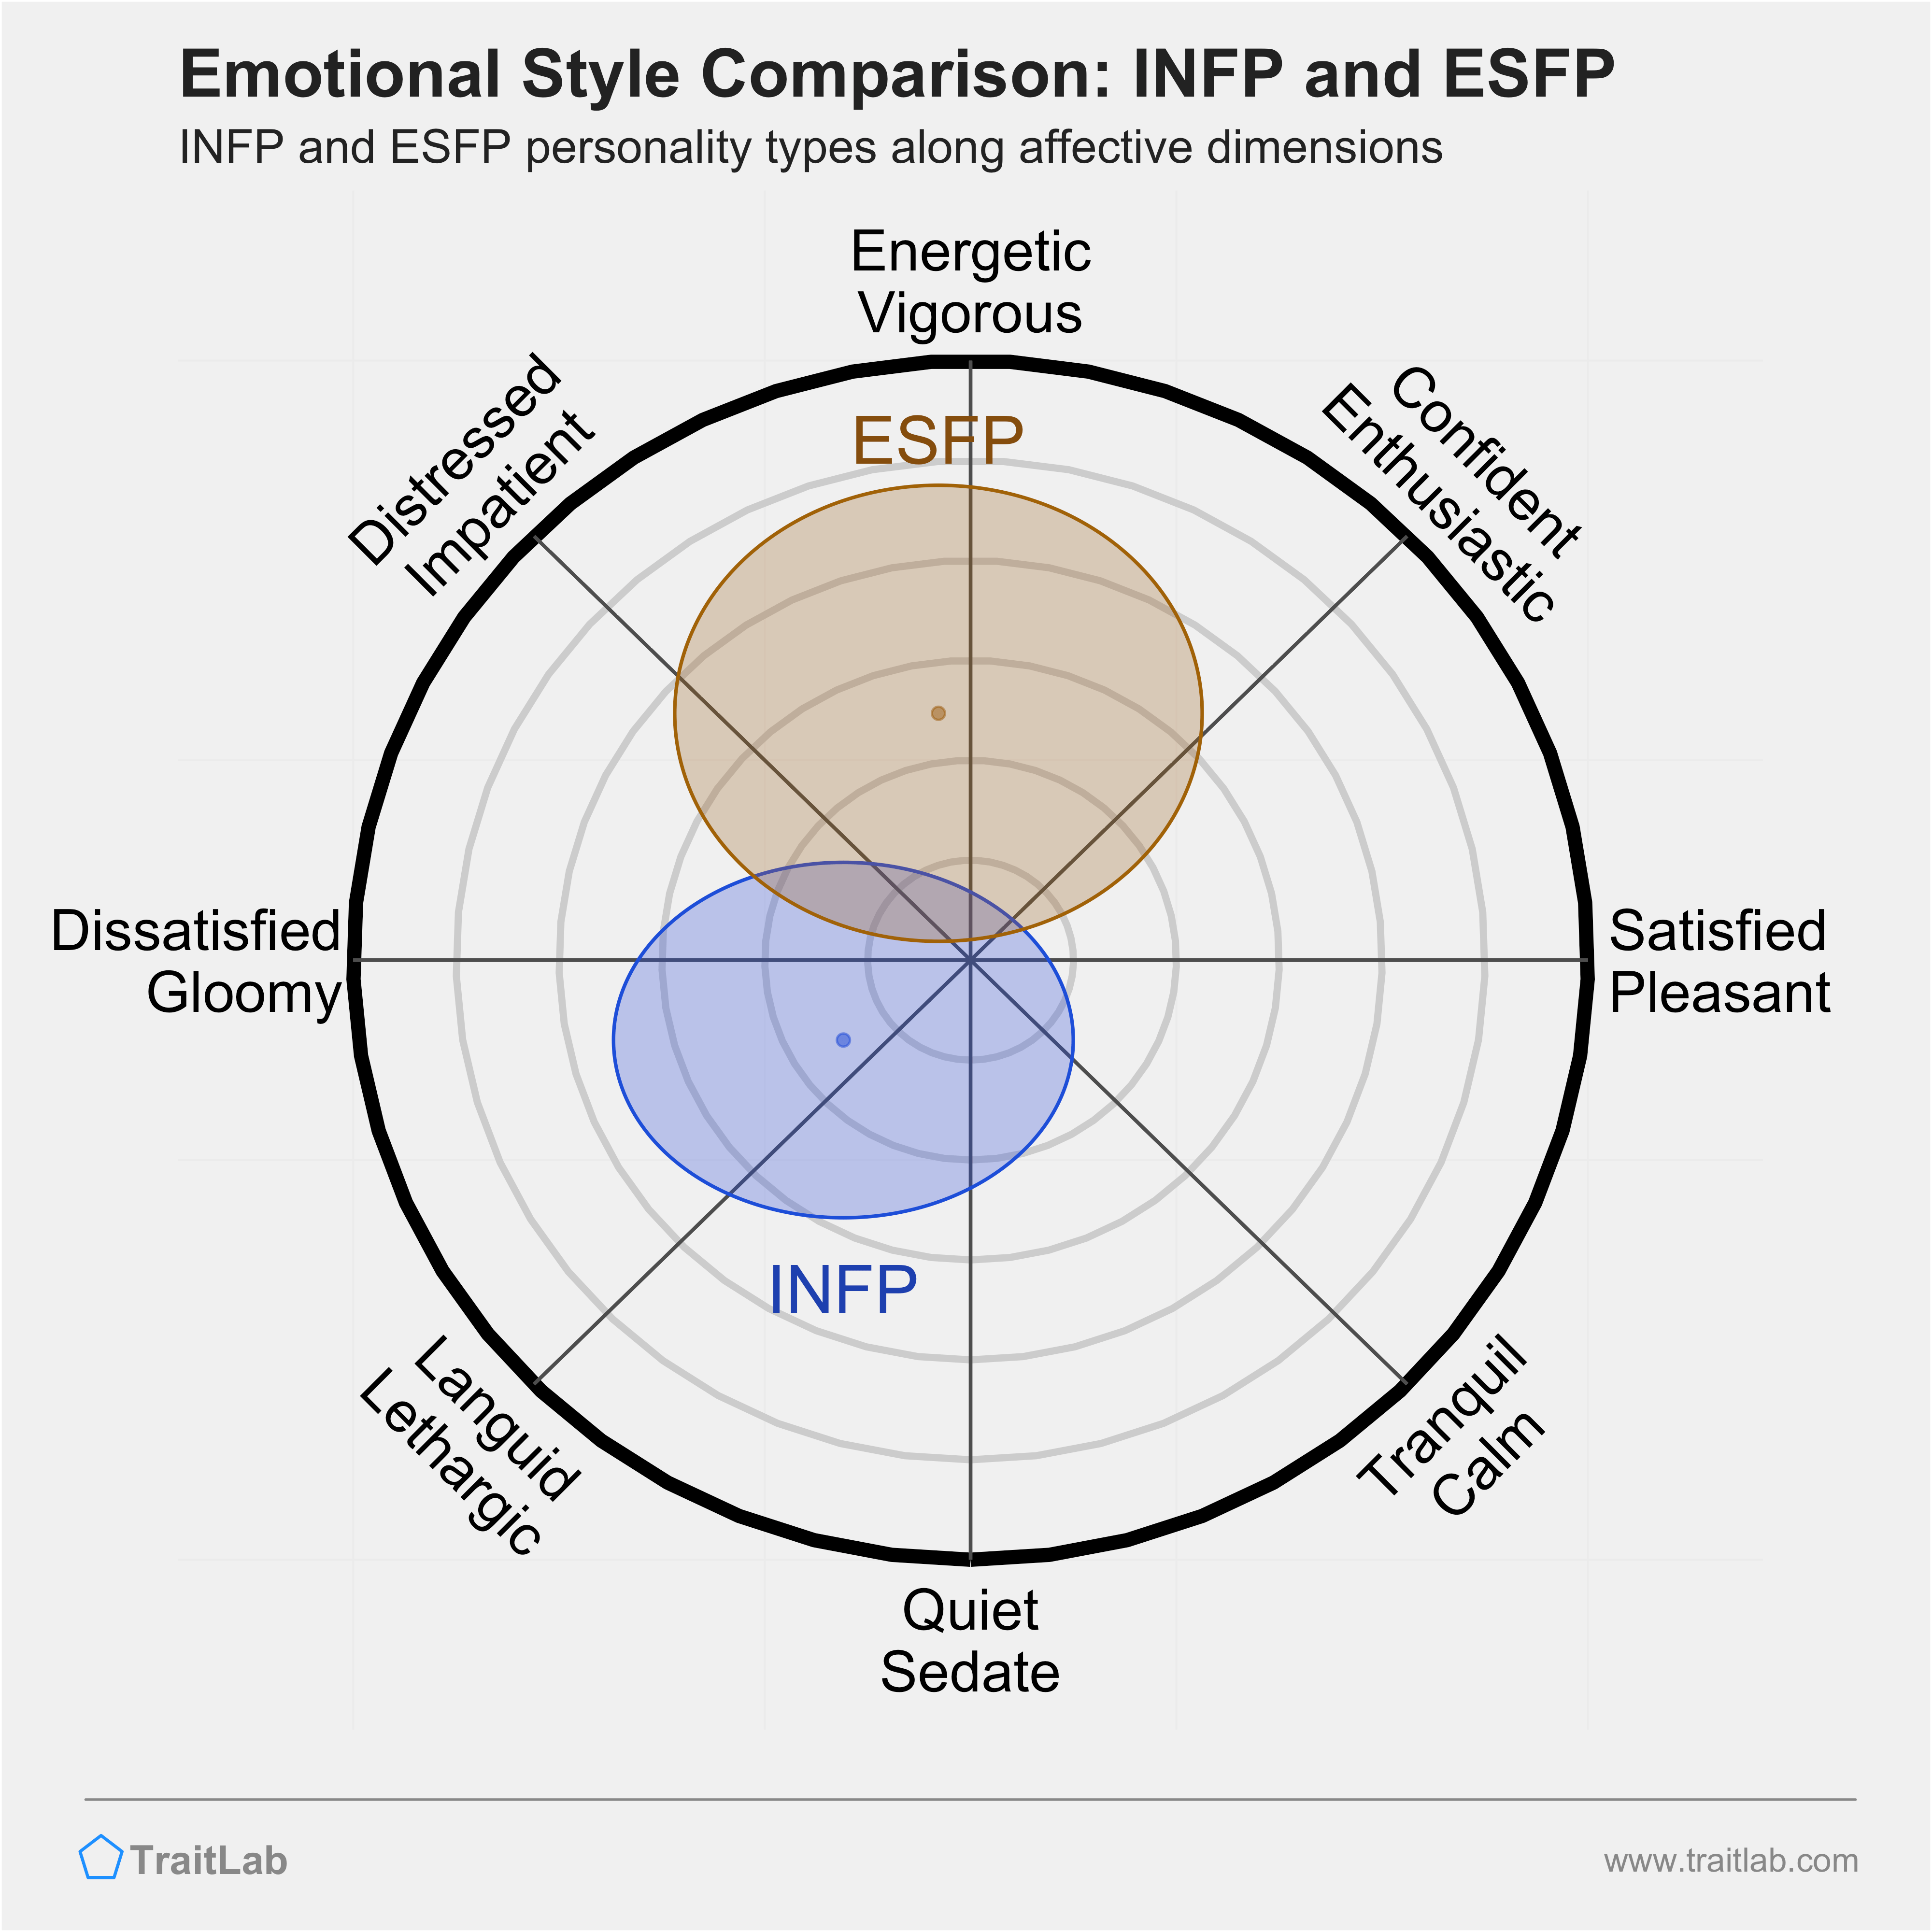 INFP and ESFP comparison across emotional (affective) dimensions